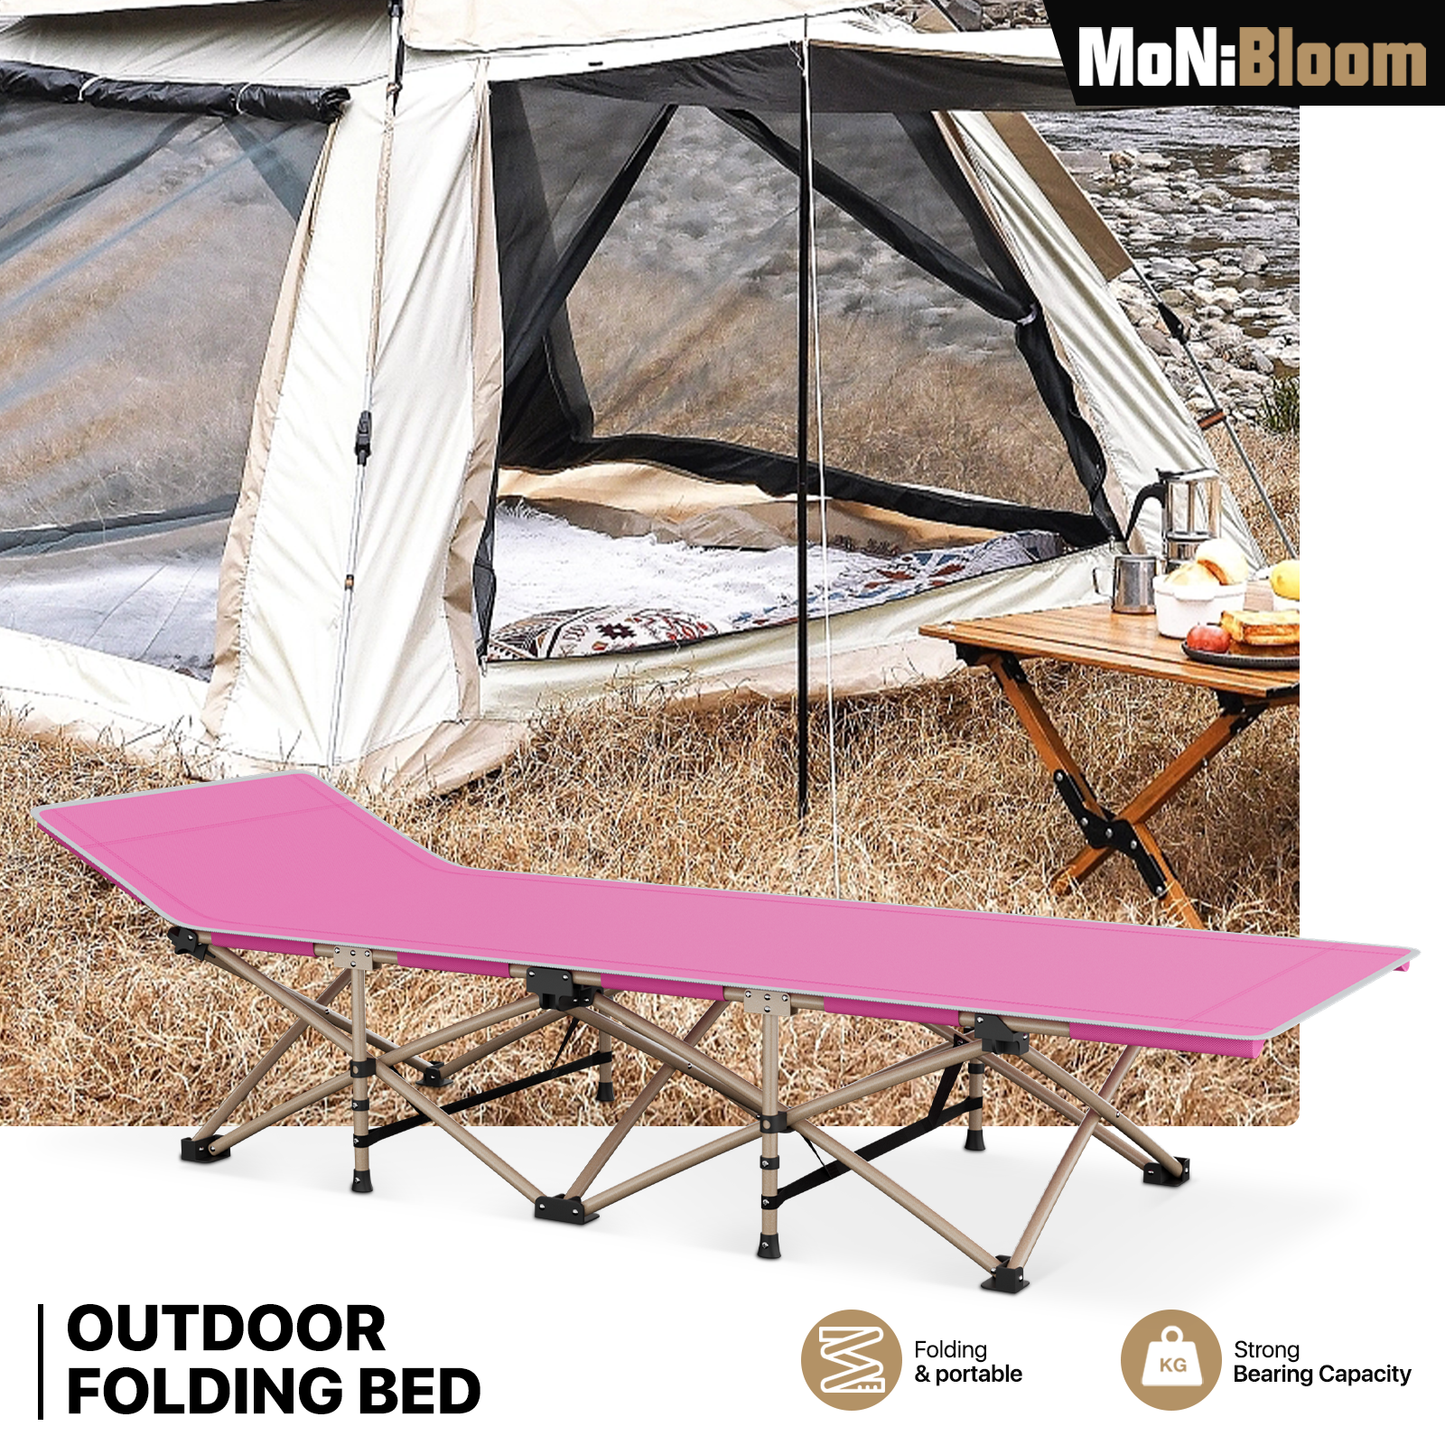 Oxford Foldable Military Cot Porable Reclinable Camping Bed - Aluminum Frame